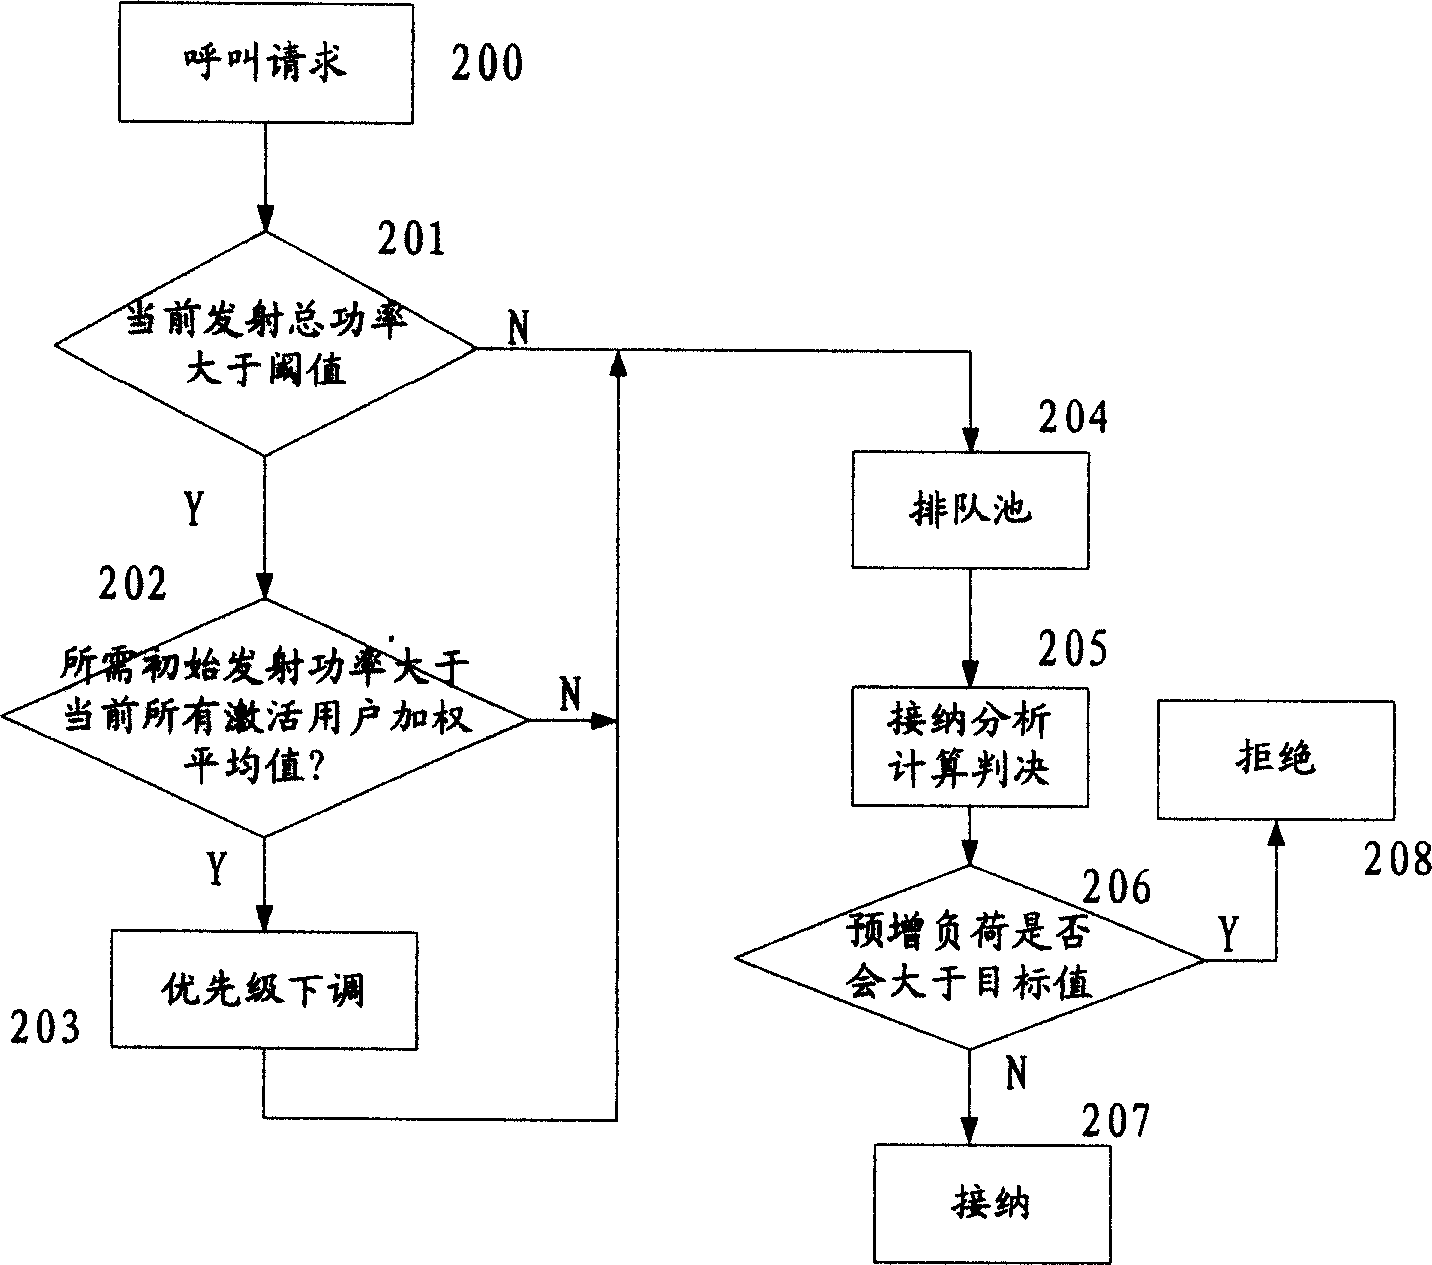 A wireless communication system access control method